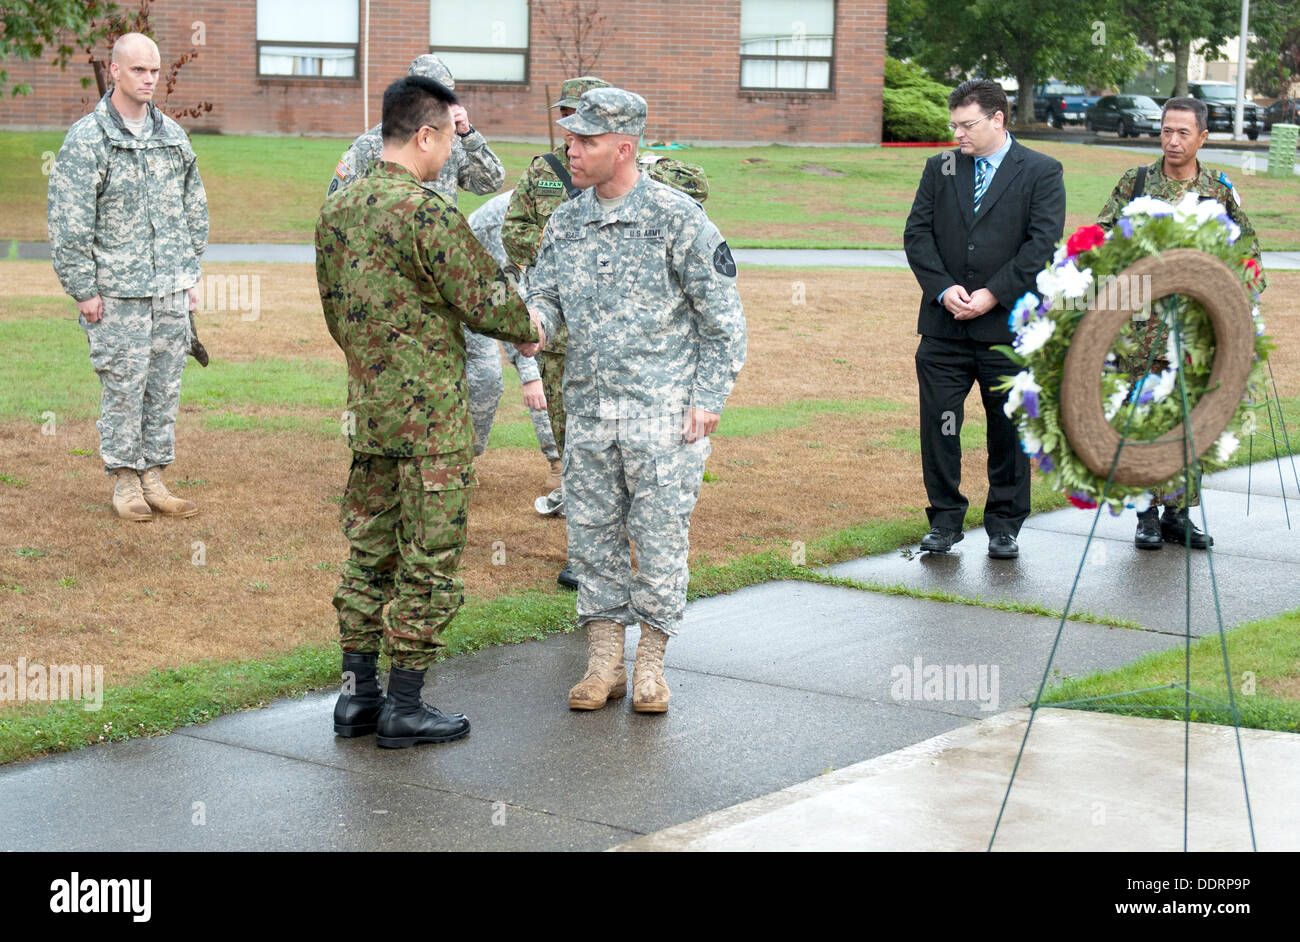 Maj. Gen. Omori (left), deputy commanding general, 4th Division, Northern Army, Japanese Ground Self-Defense Force, bids farewell to Col. Hugh D. Bair, commander, 3rd Stryker Brigade Combat Team, 2nd Infantry Division, at the conclusion of a wreath laying Stock Photo